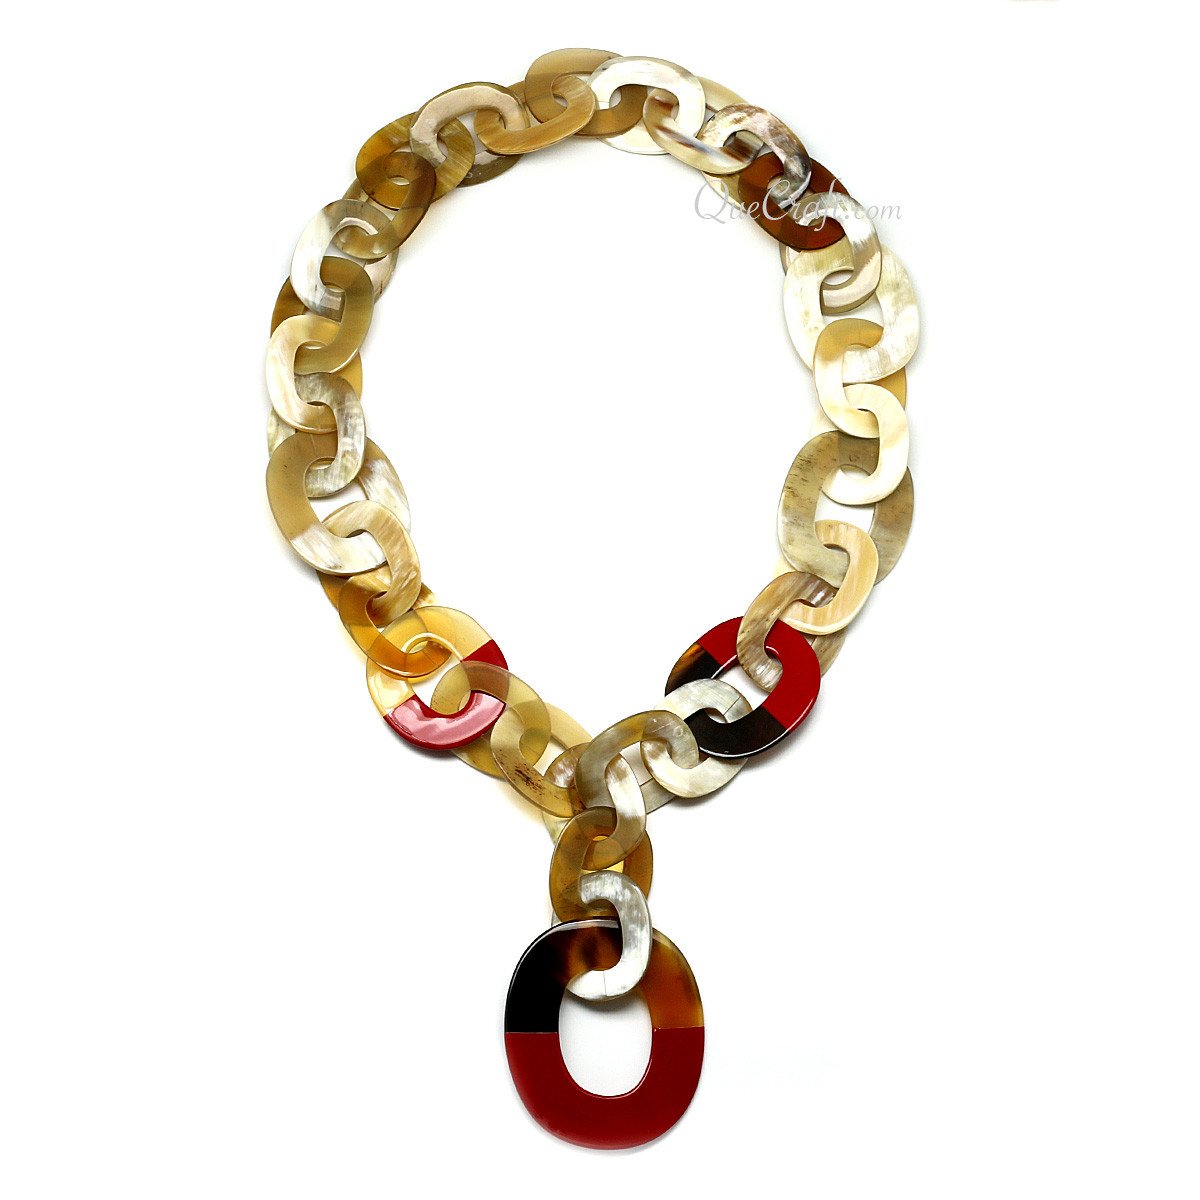 Horn & Lacquer Chain Necklace #11280 - HORN JEWELRY